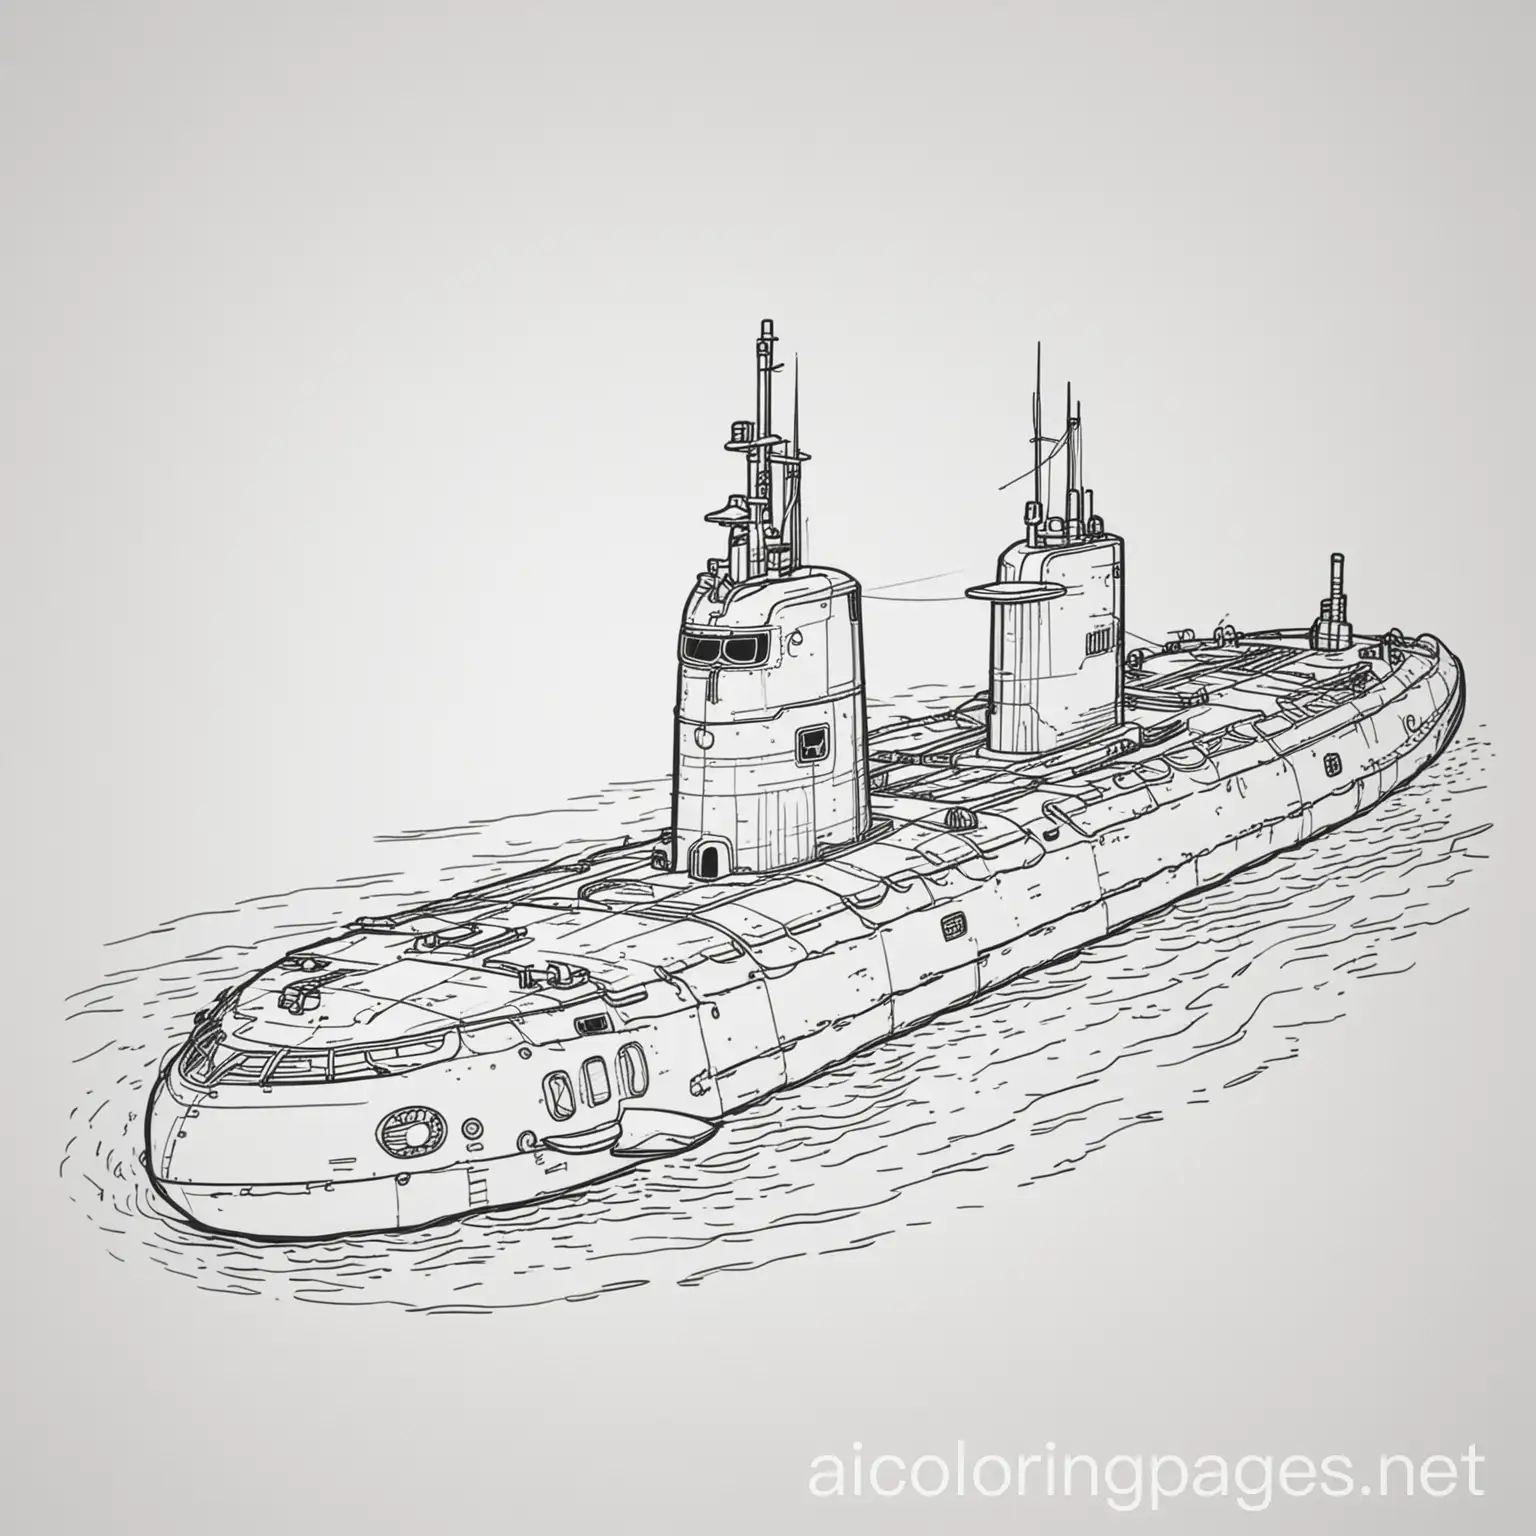 military submarine

, Coloring Page, black and white, line art, white background, Simplicity, Ample White Space. The background of the coloring page is plain white to make it easy for young children to color within the lines. The outlines of all the subjects are easy to distinguish, making it simple for kids to color without too much difficulty